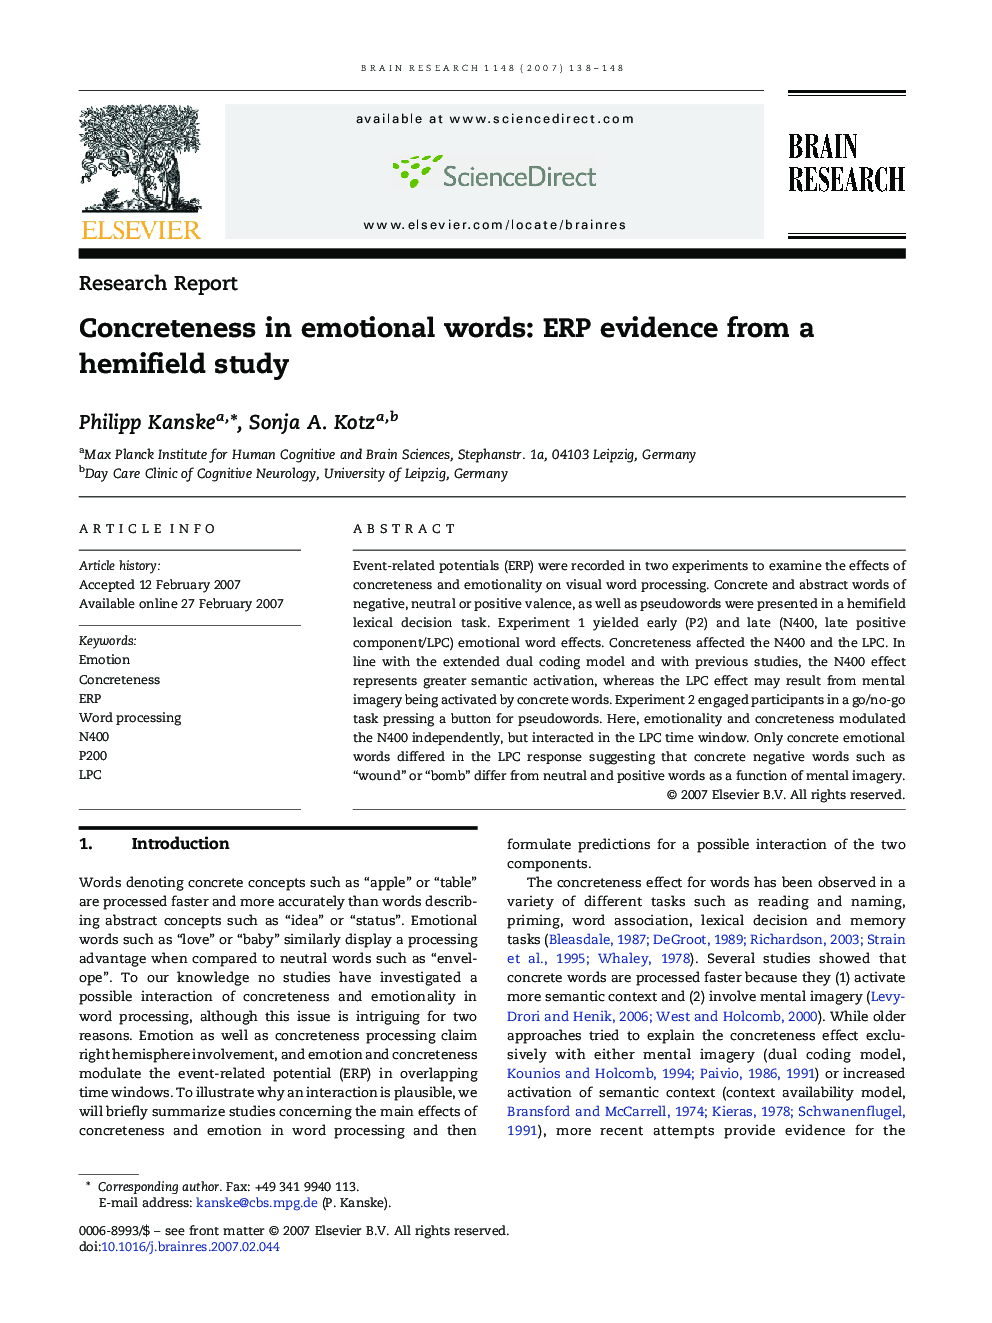 Concreteness in emotional words: ERP evidence from a hemifield study